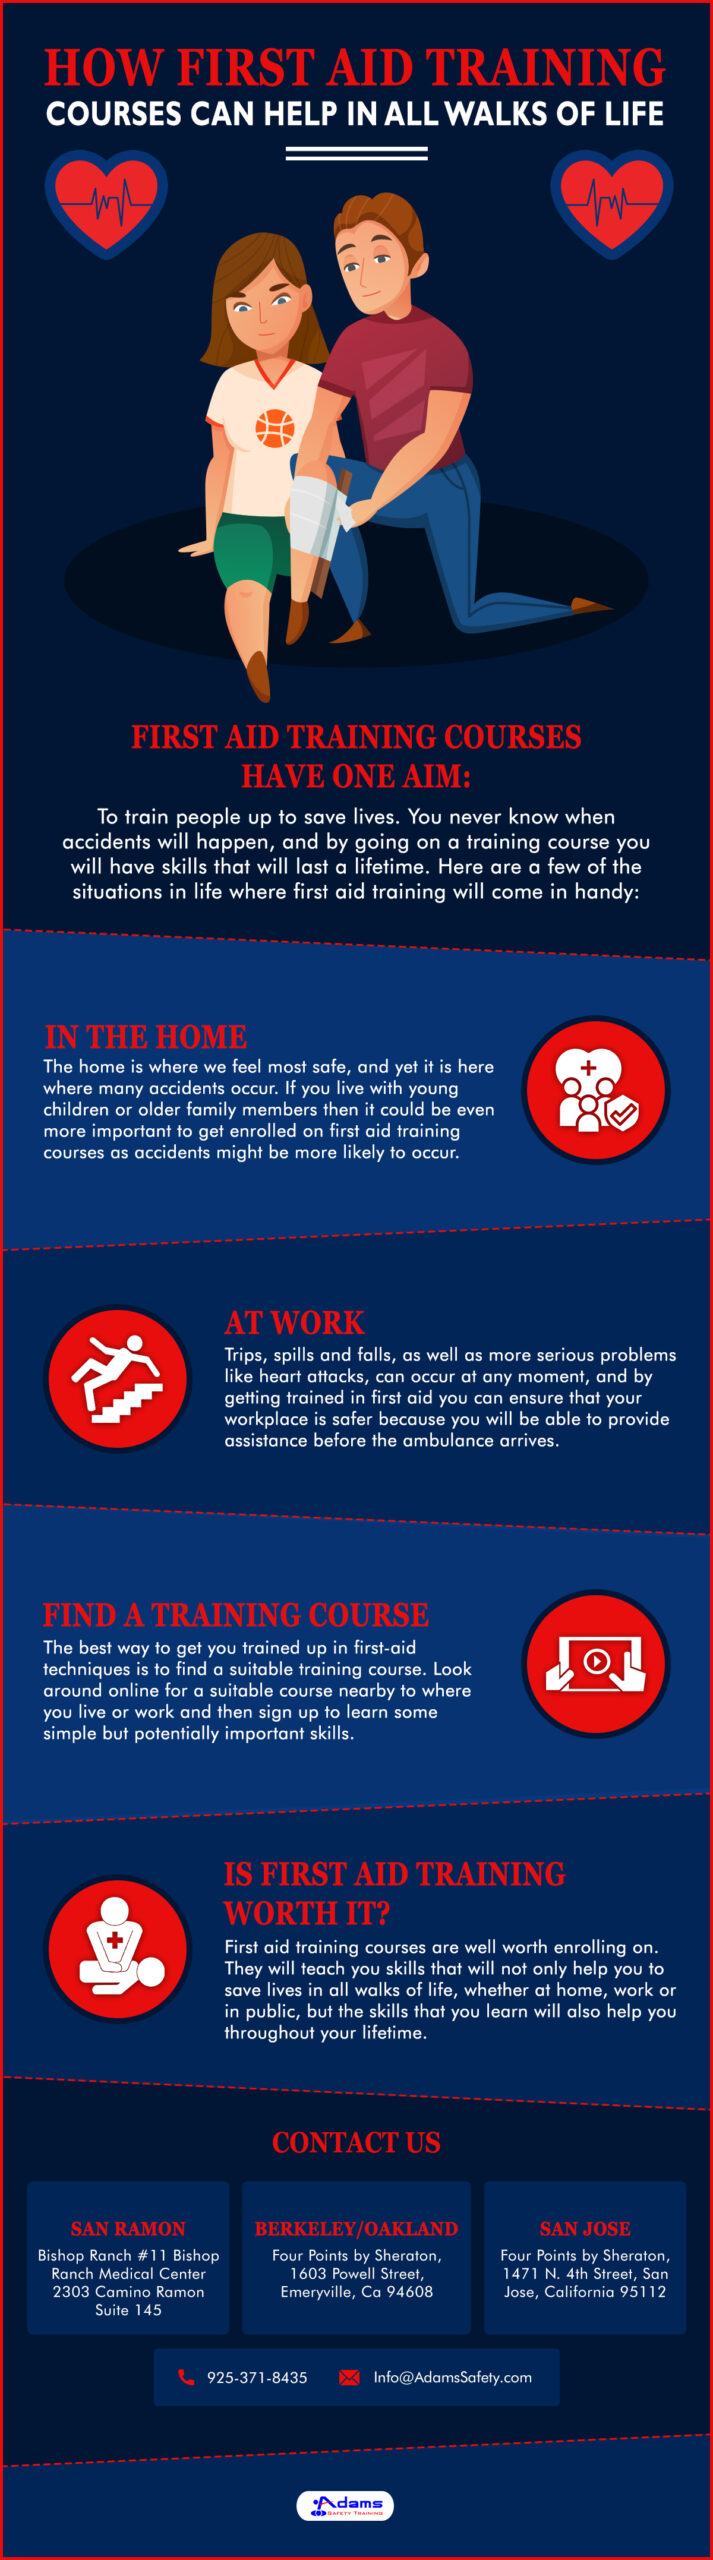 HOW FIRST AID TRAINING COURSES CAN HELP IN ALL WALKS OF LIFE [INFOGRAPHIC]